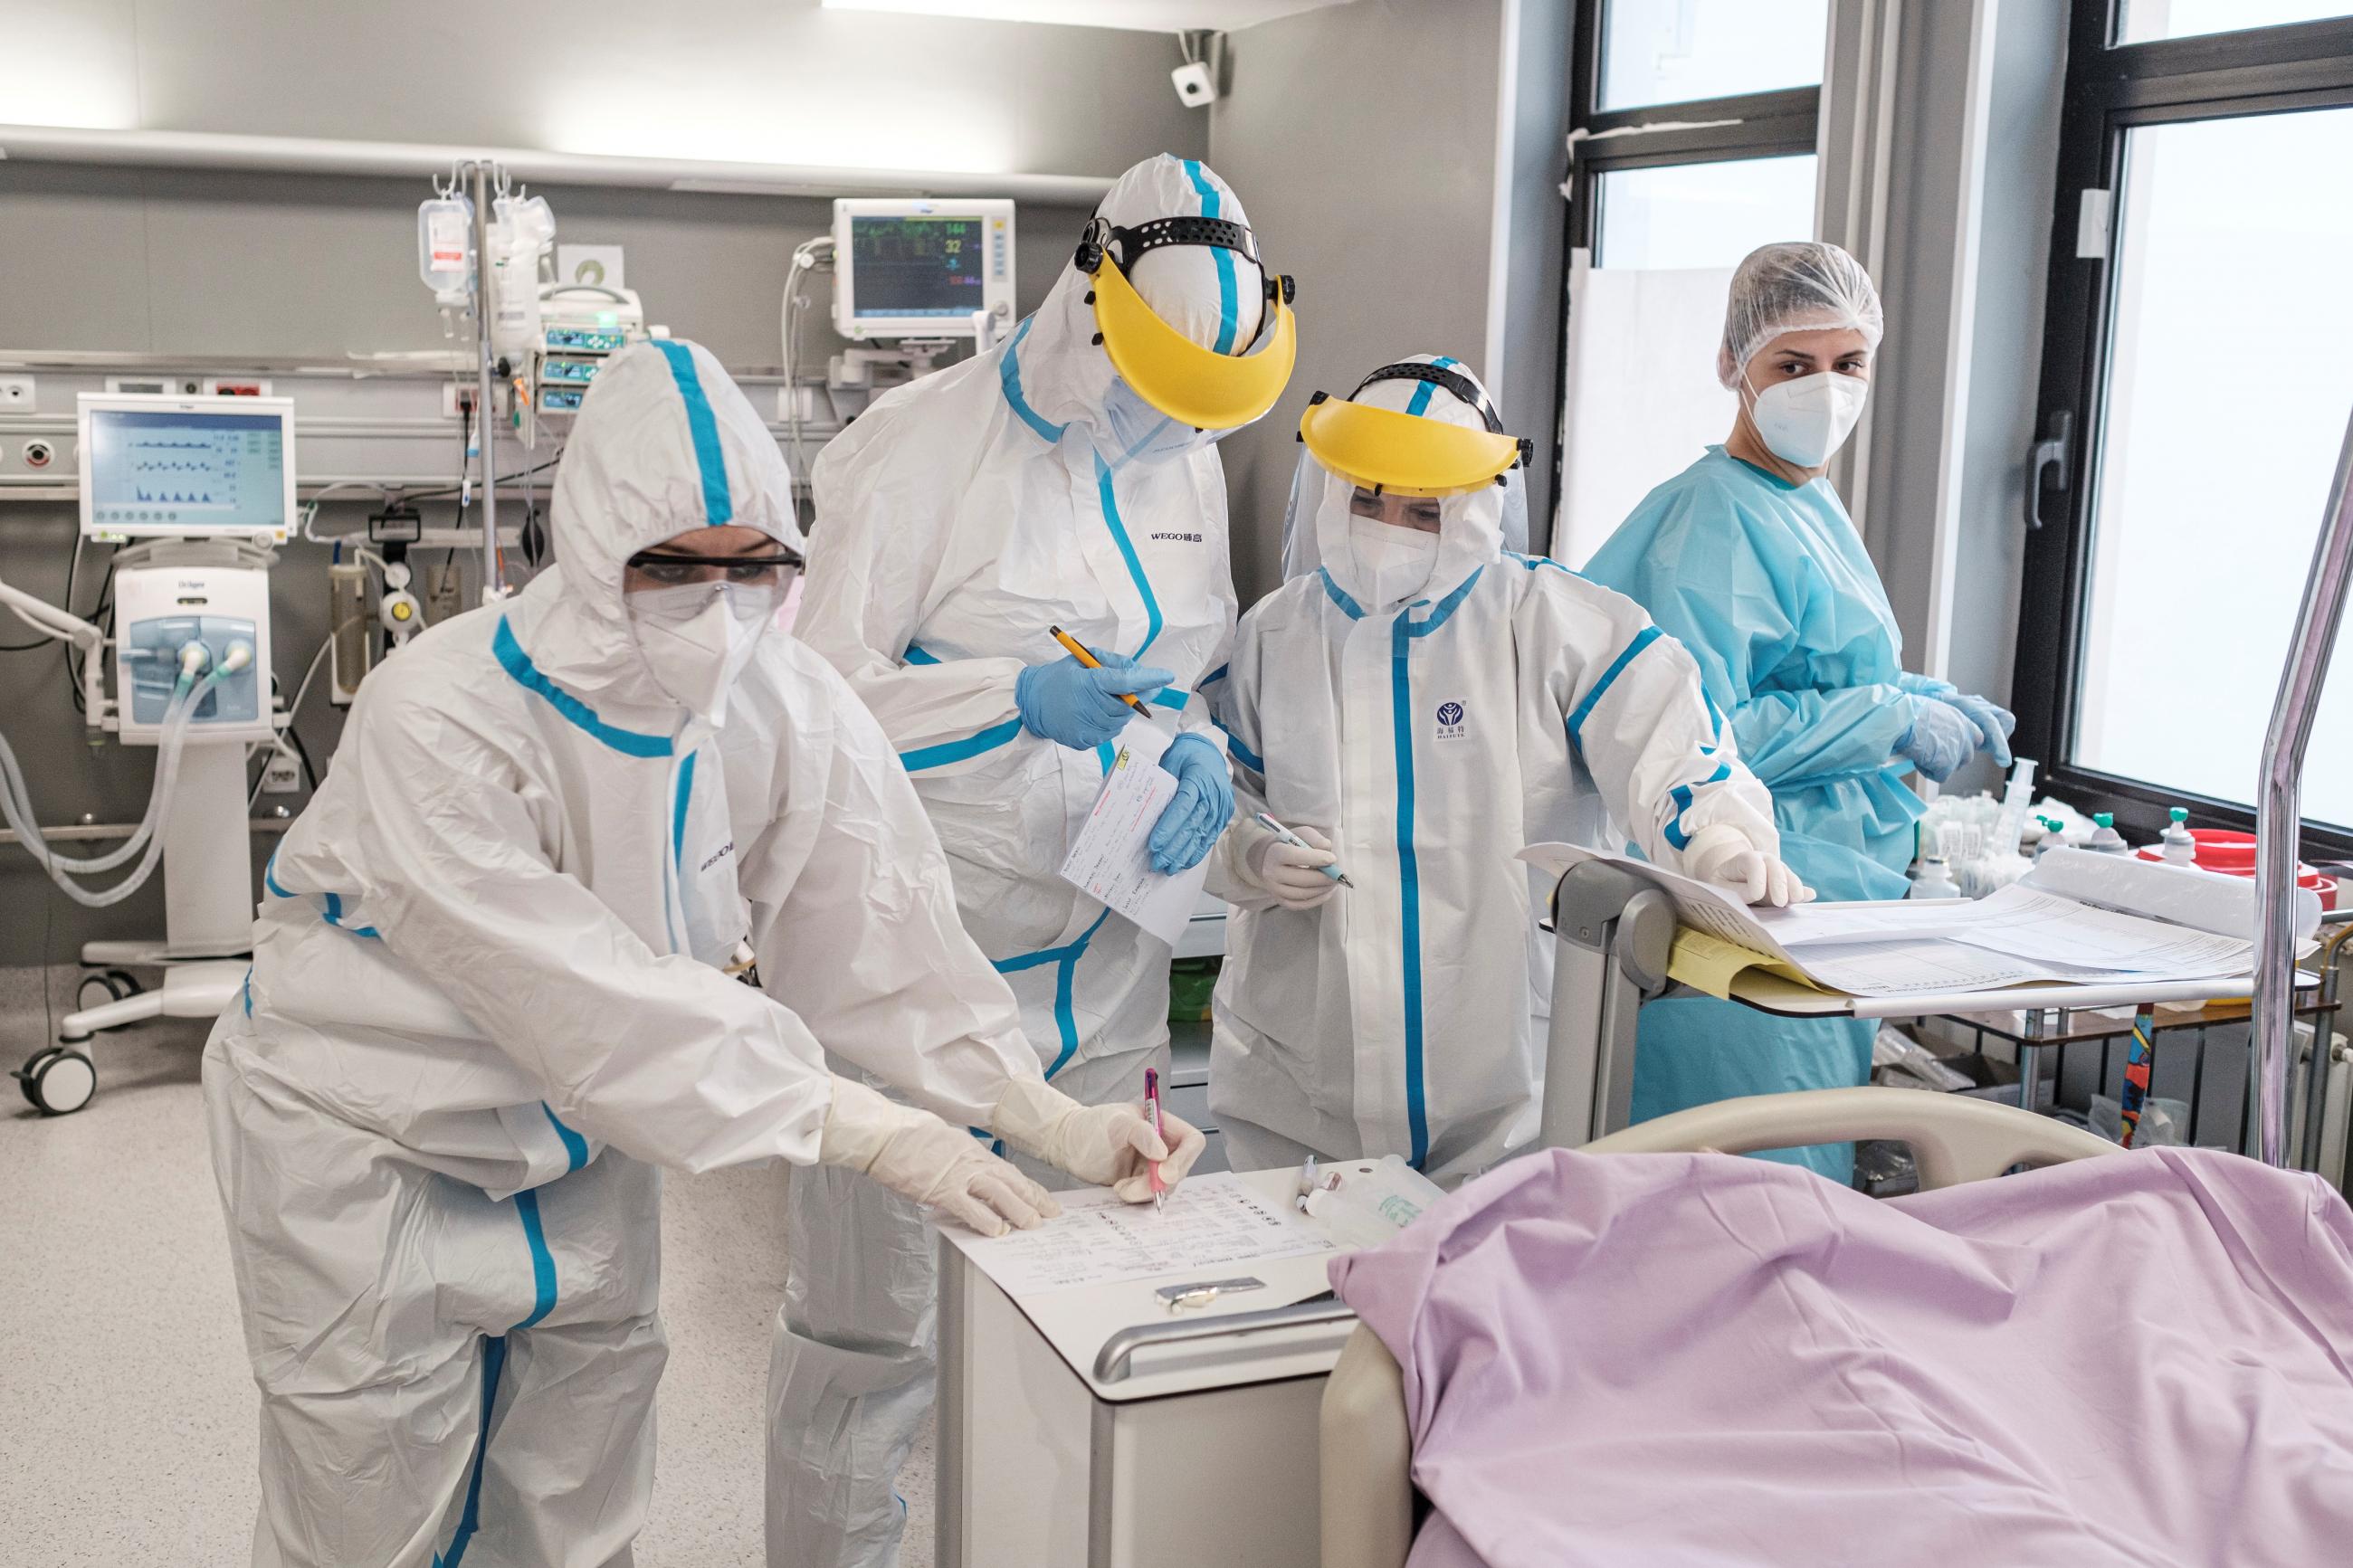 Doctors and nurses treat patients suffering from the coronavirus disease at the intensive care unit of the Clinical Center of Vojvodina in Novi Sad, Serbia, March 8, 2021.